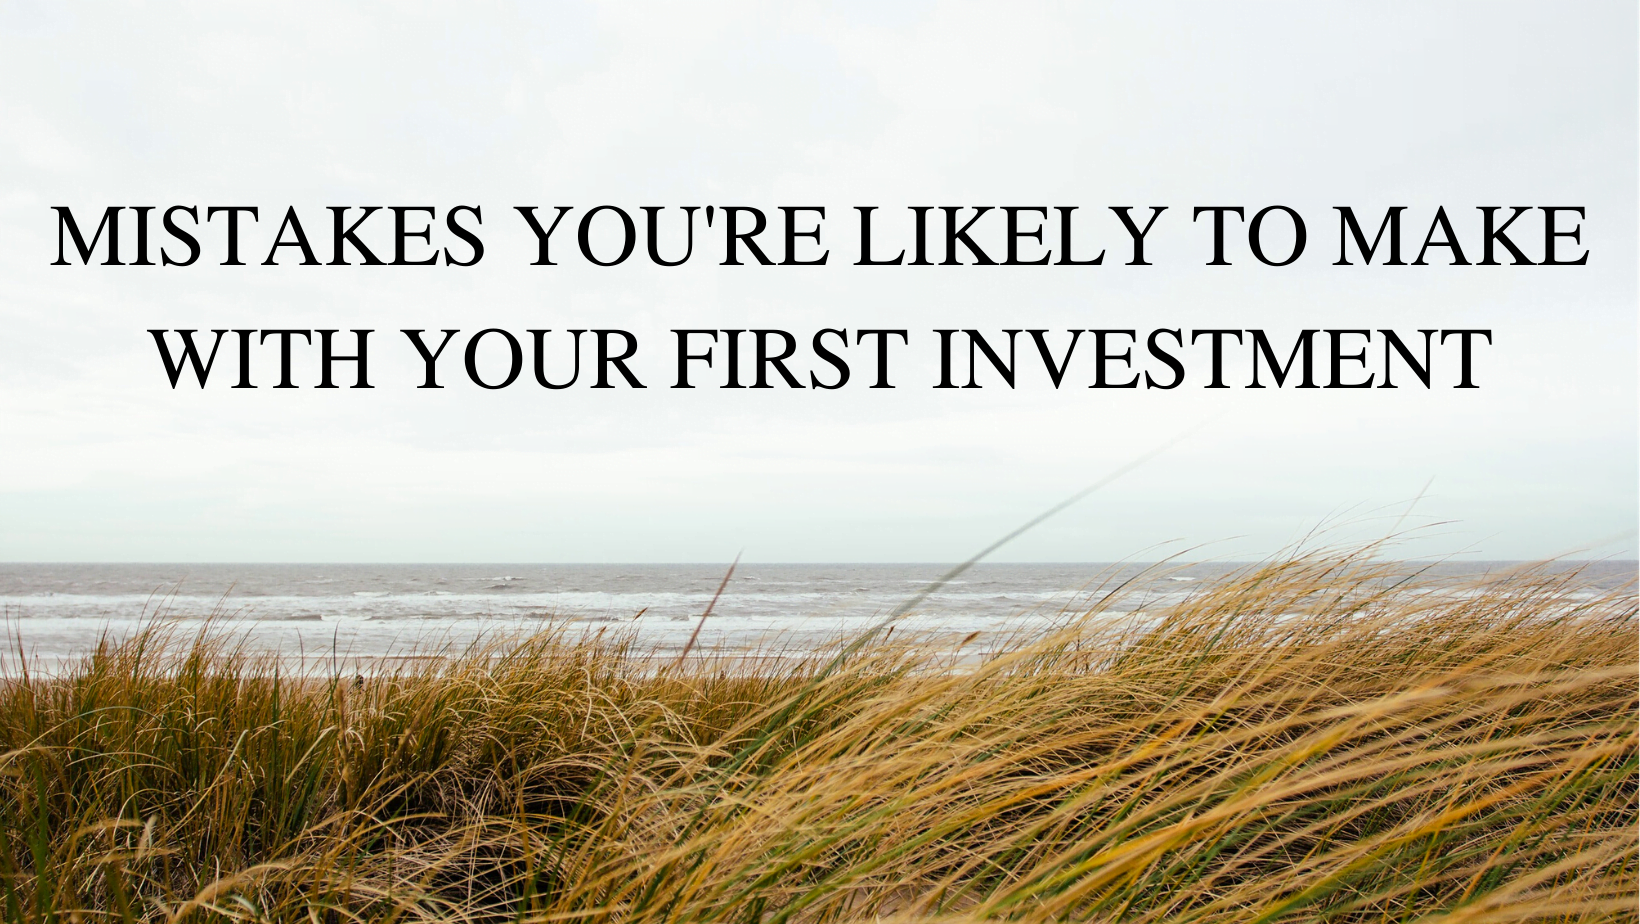 MISTAKES YOU’RE LIKELY TO MAKE WITH YOUR FIRST INVESTMENT